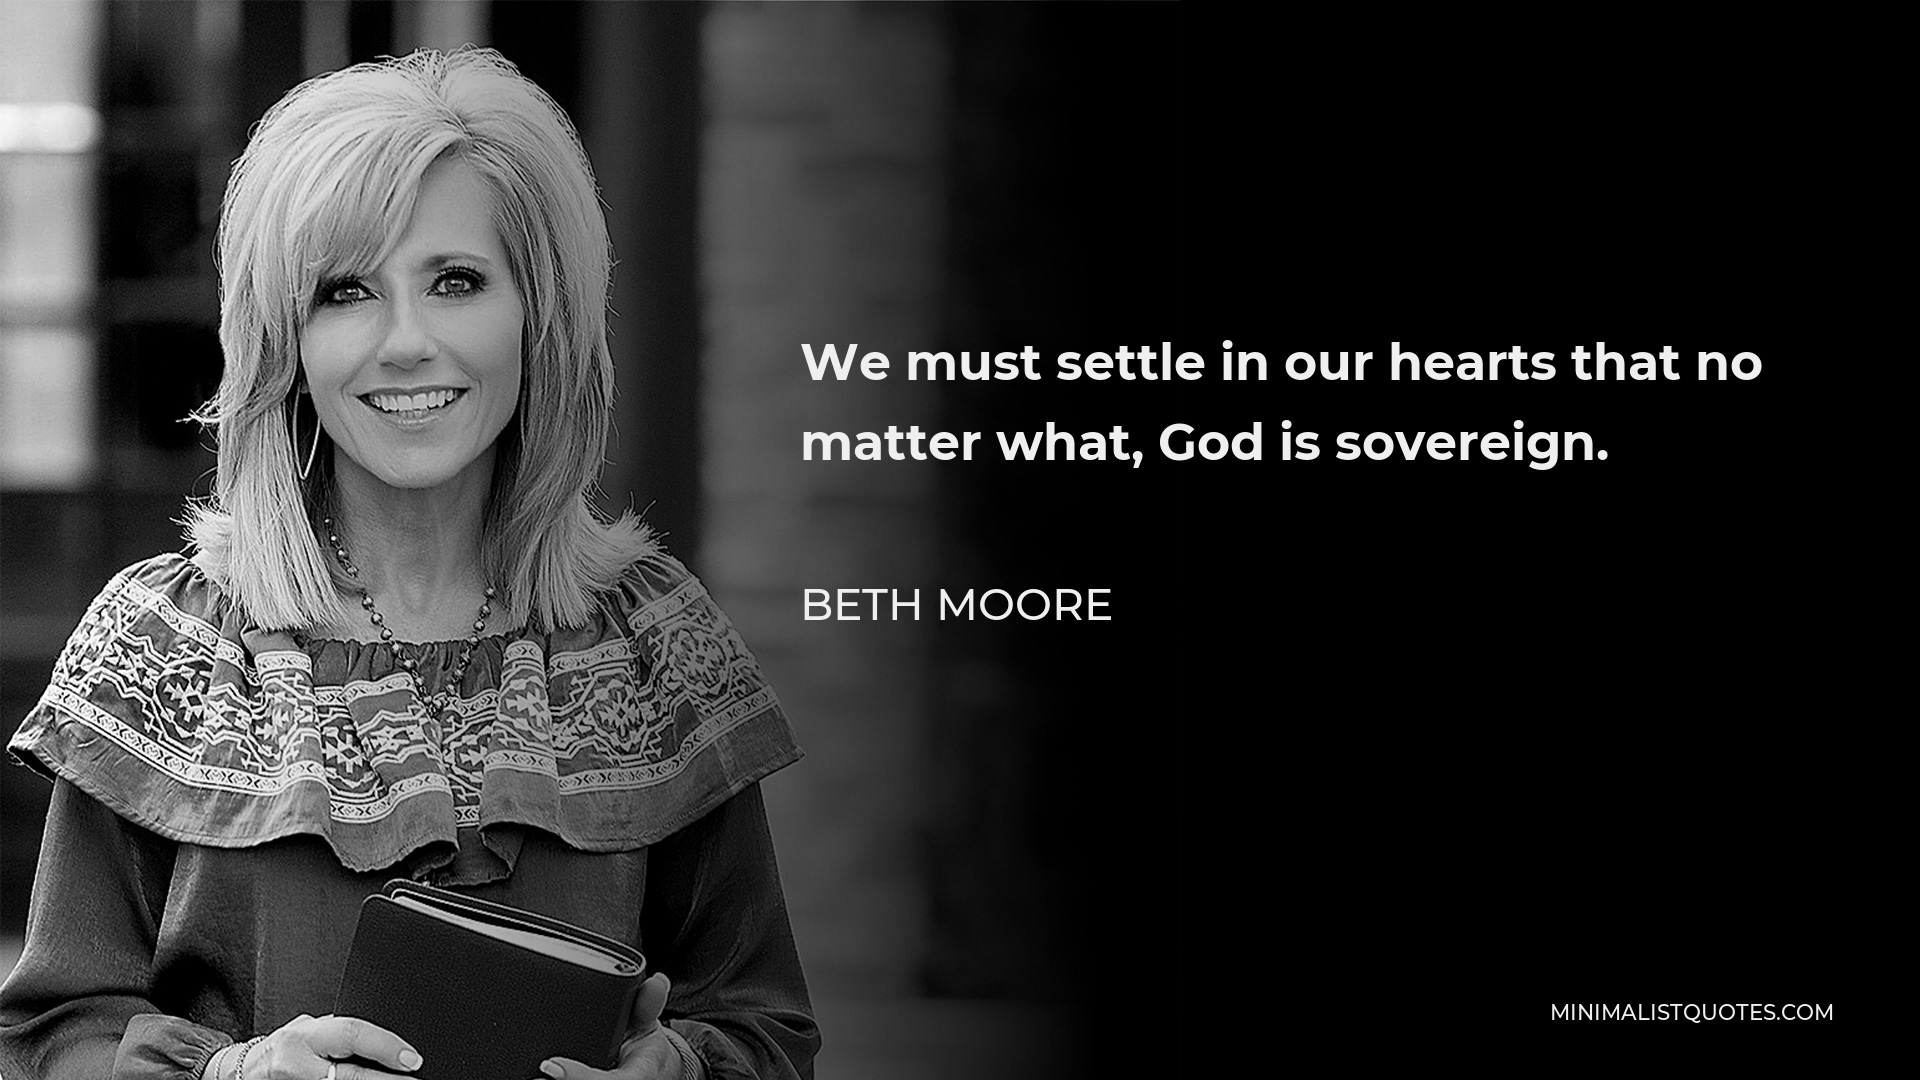 Beth Moore Quote - We must settle in our hearts that no matter what, God is sovereign.